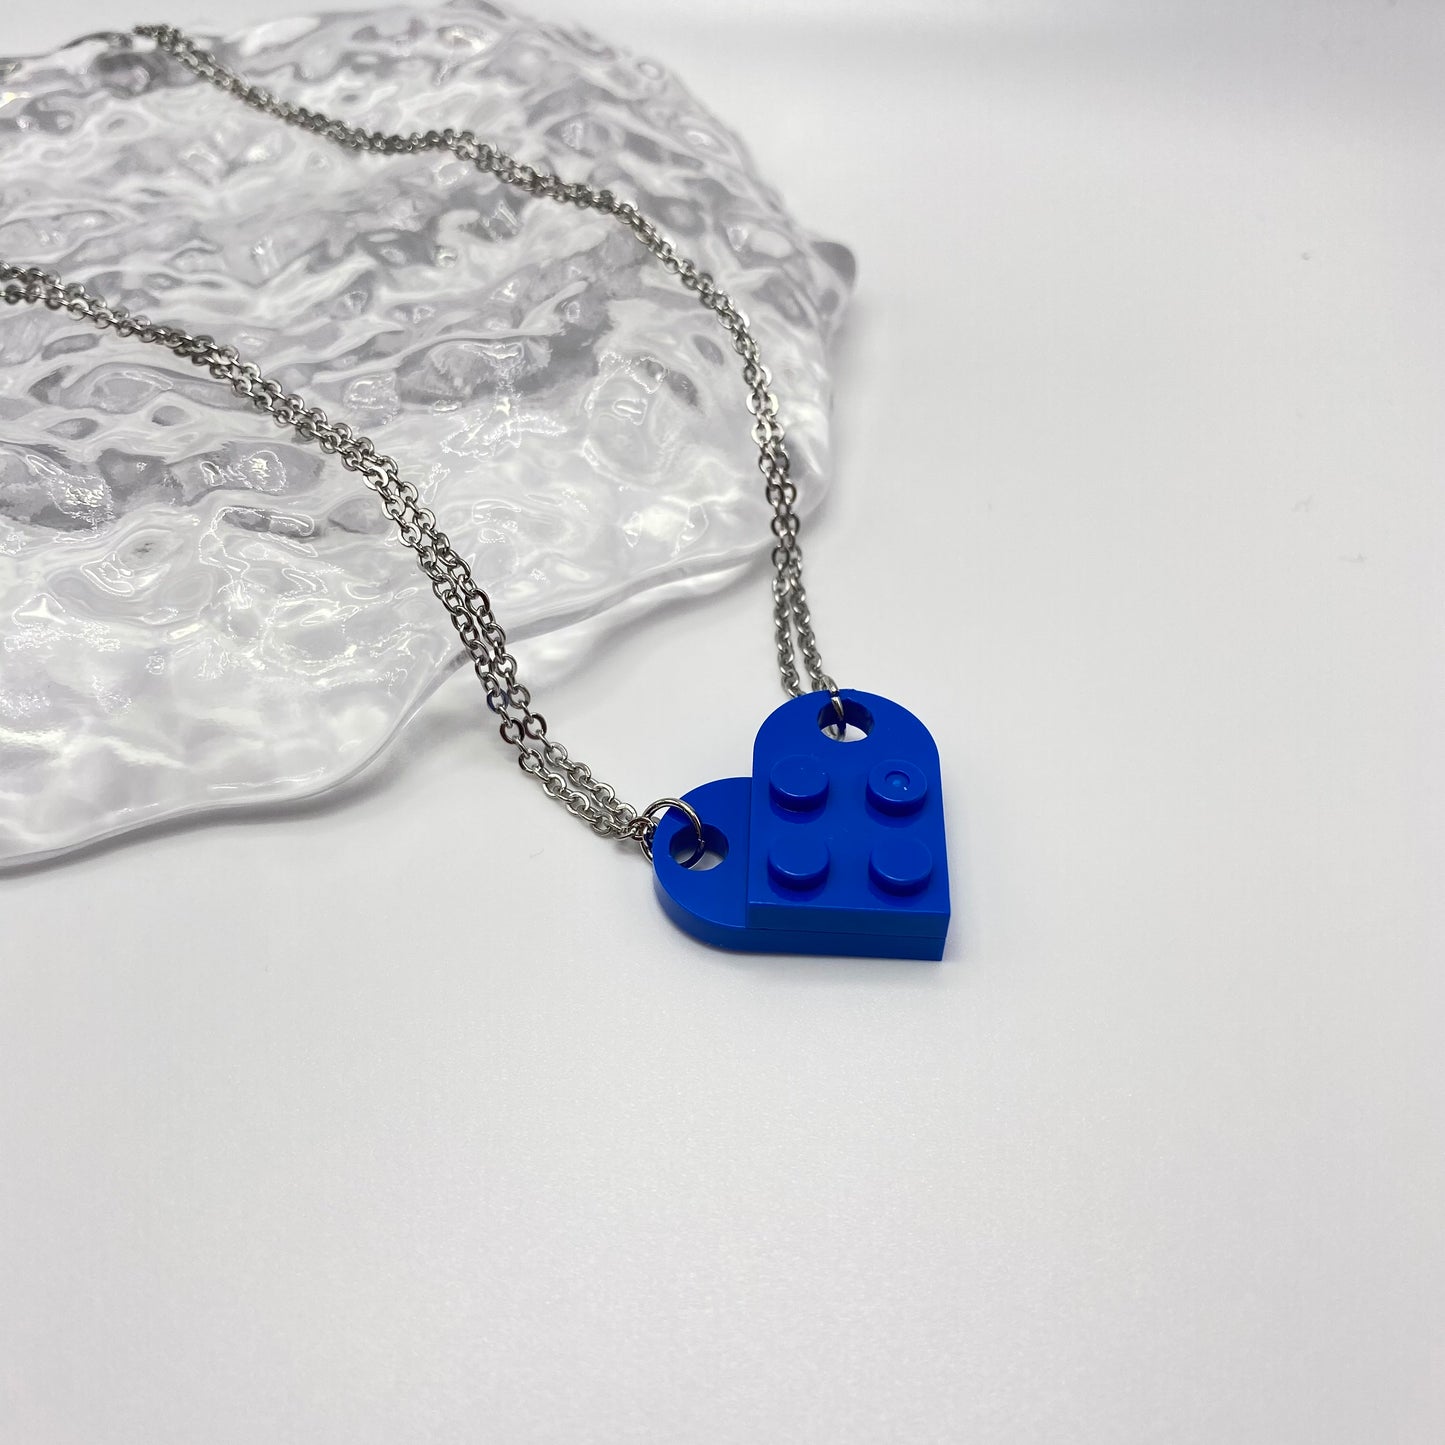 Blue Matching Lego Heart Necklace